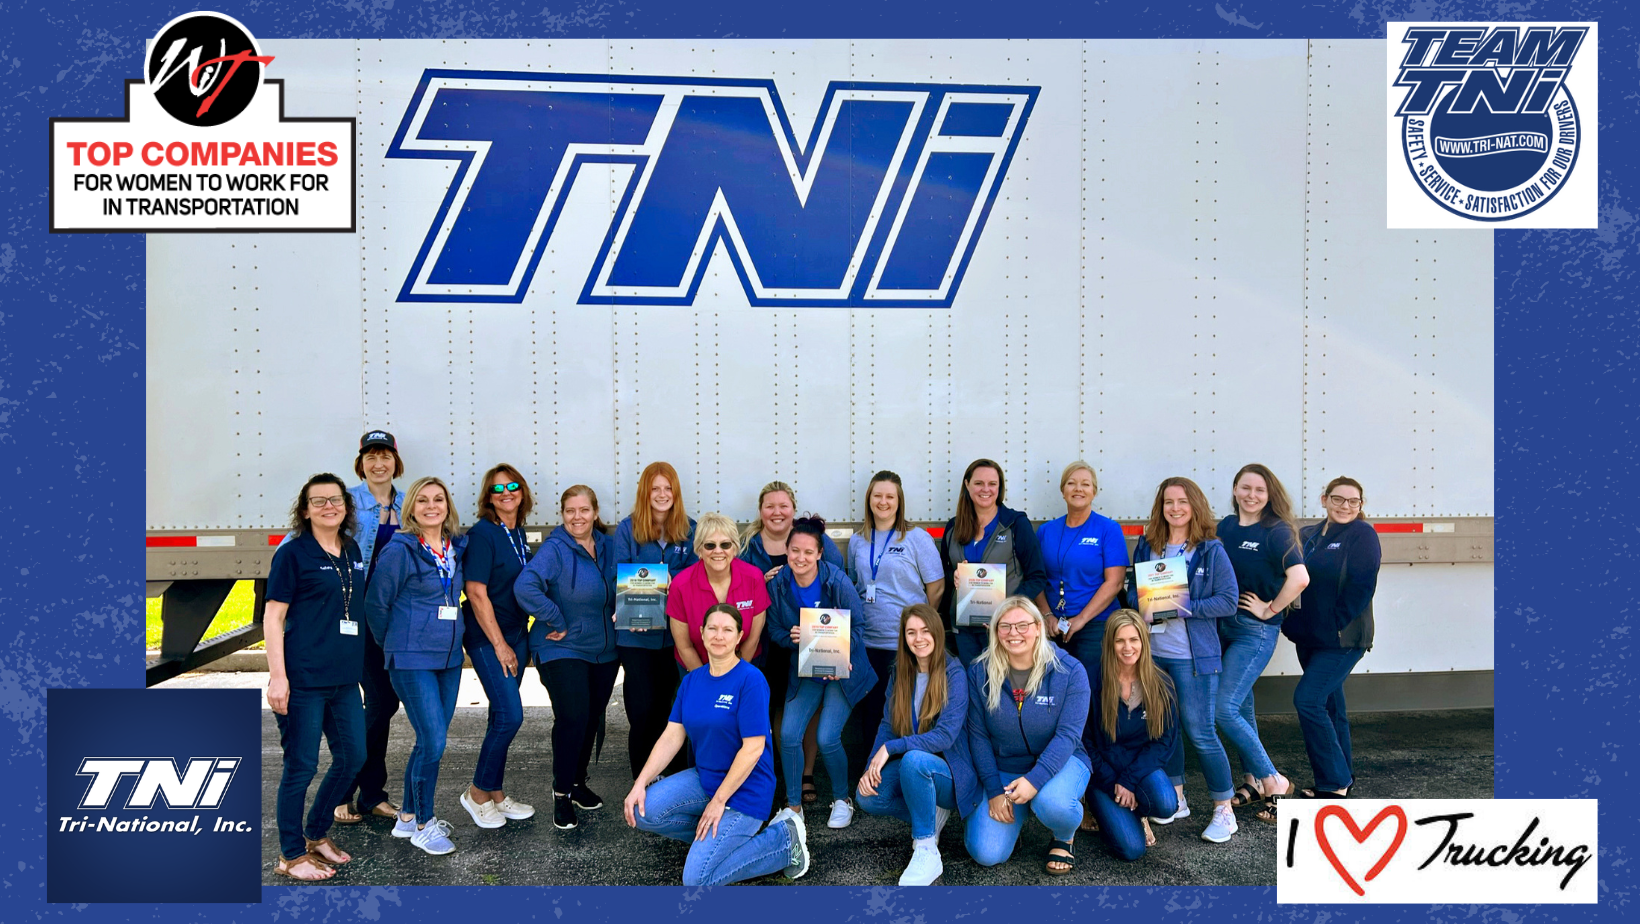 Vote Tri National for Top Company for women to work for in Transportation for 2022